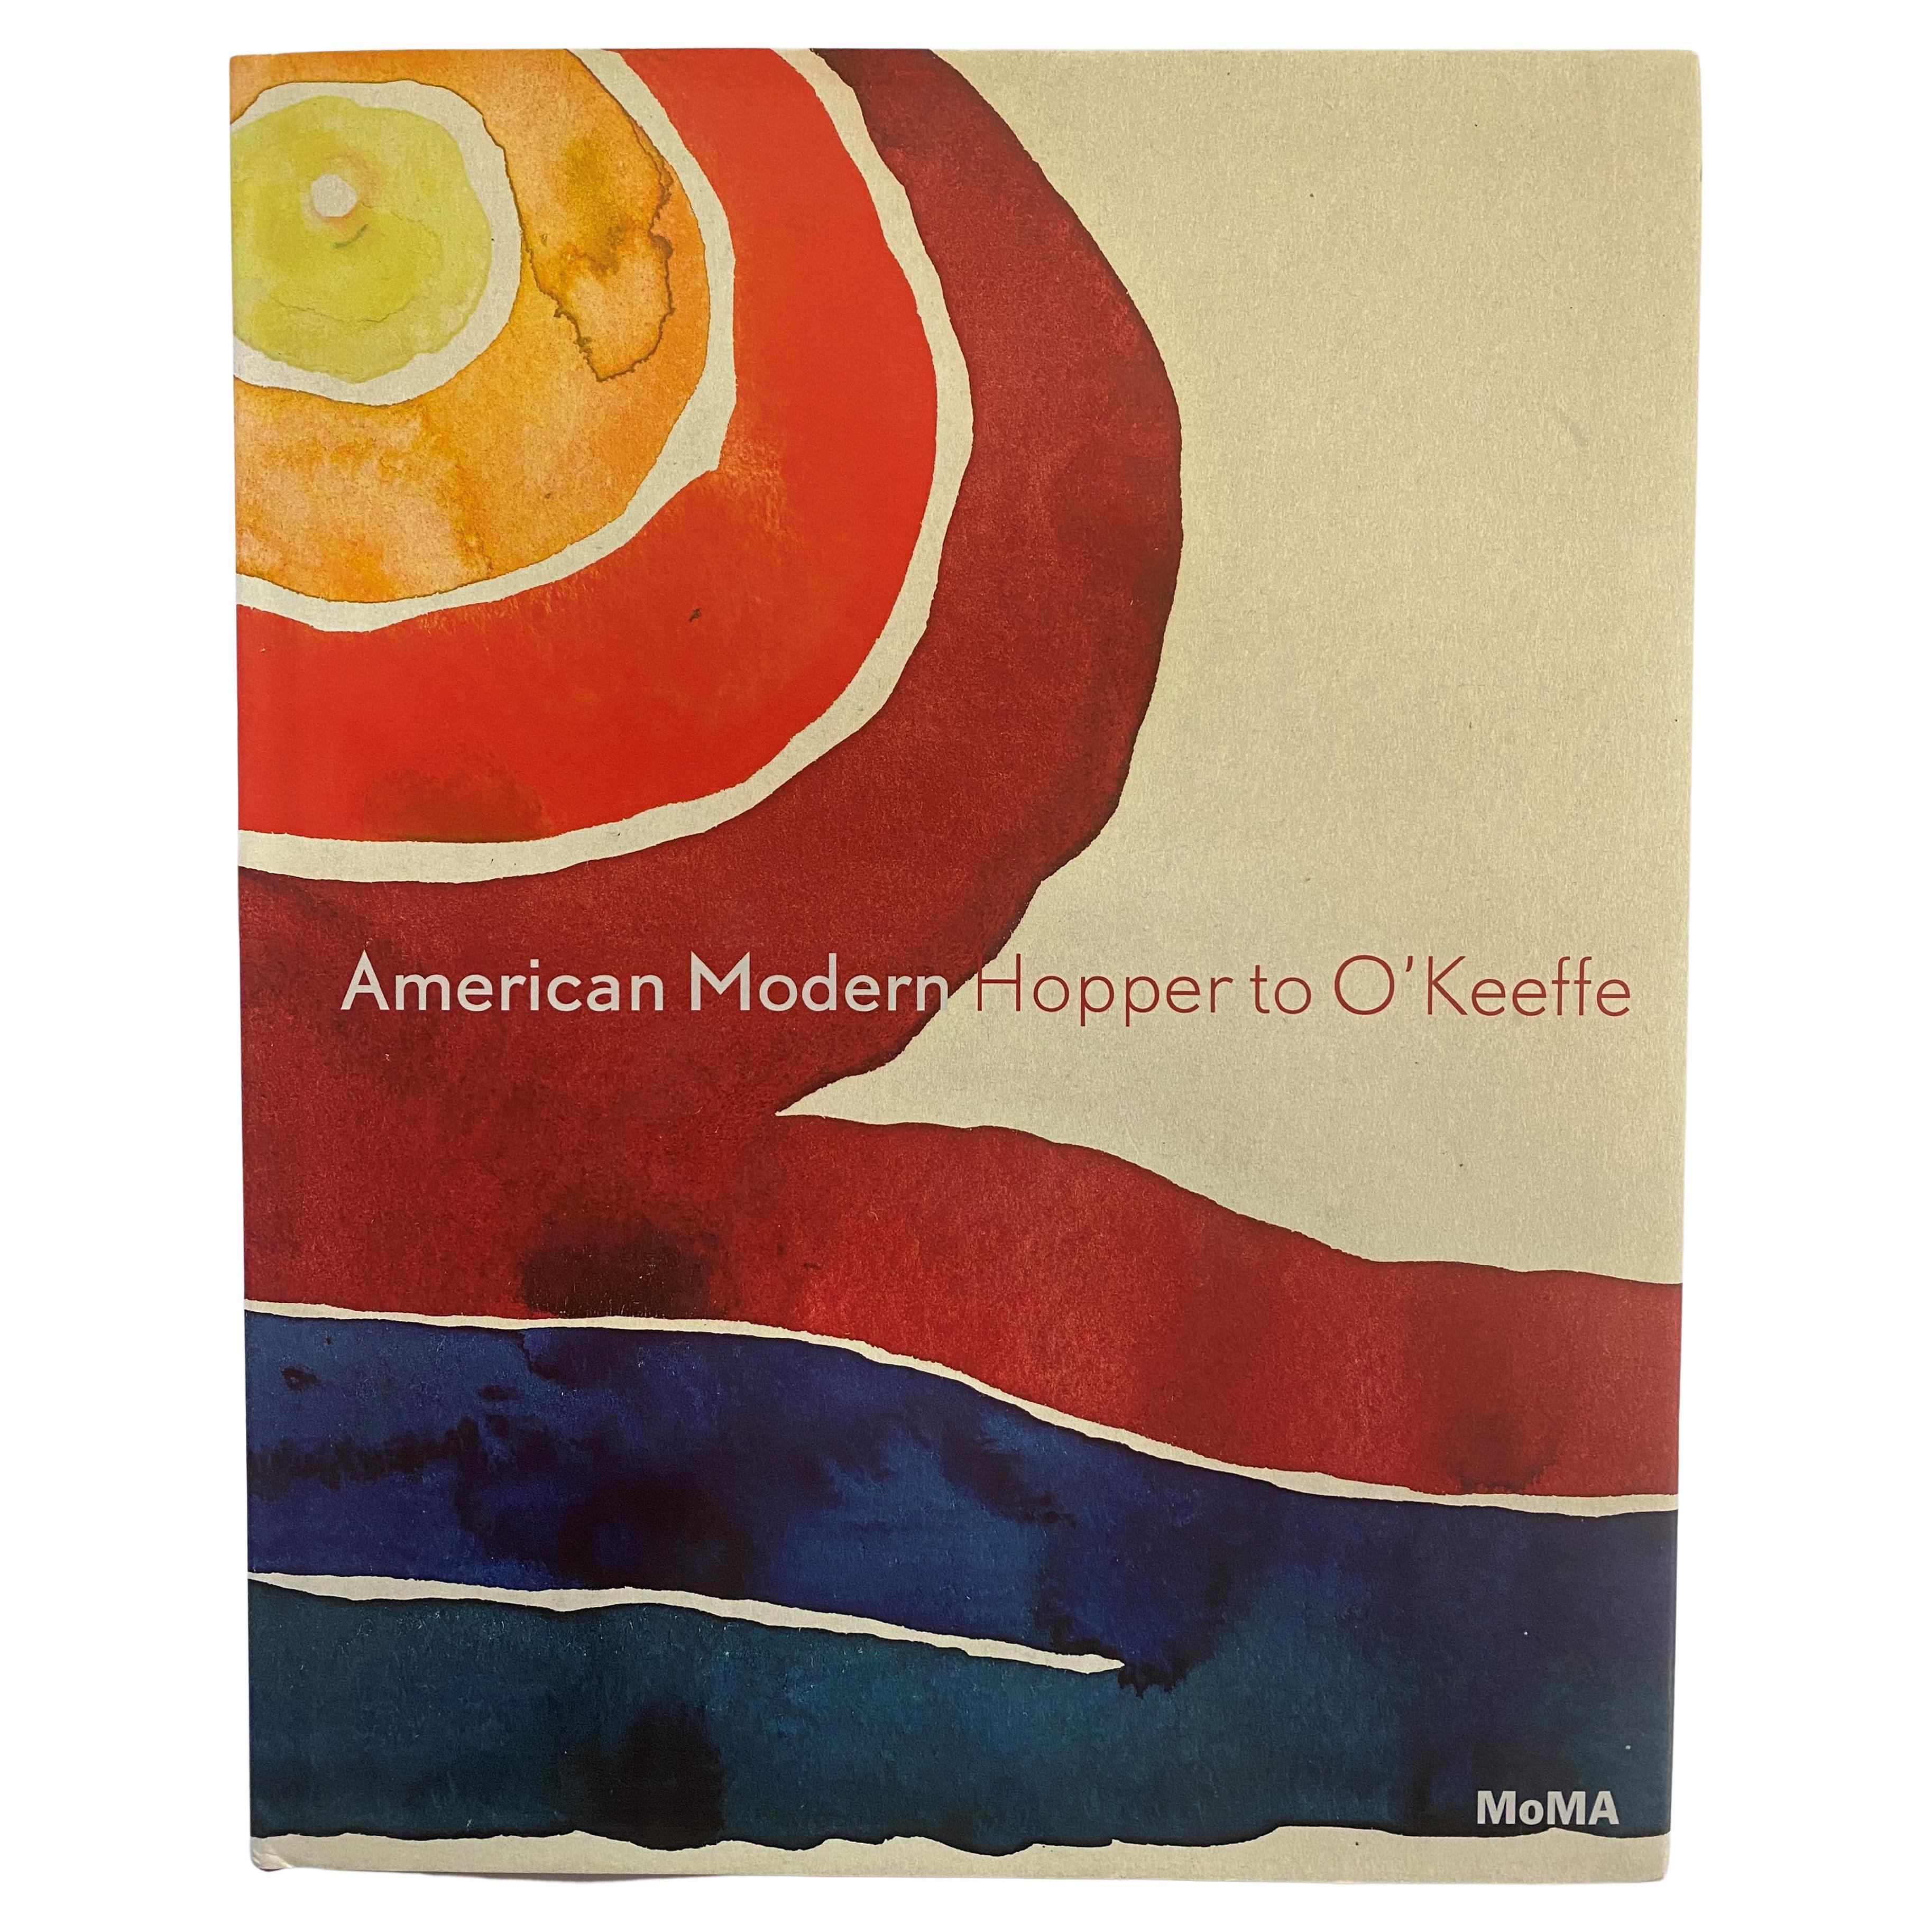 American Modern: Hopper to O'Keeffe by Kathy Curry & Esther Adler (Book) For Sale